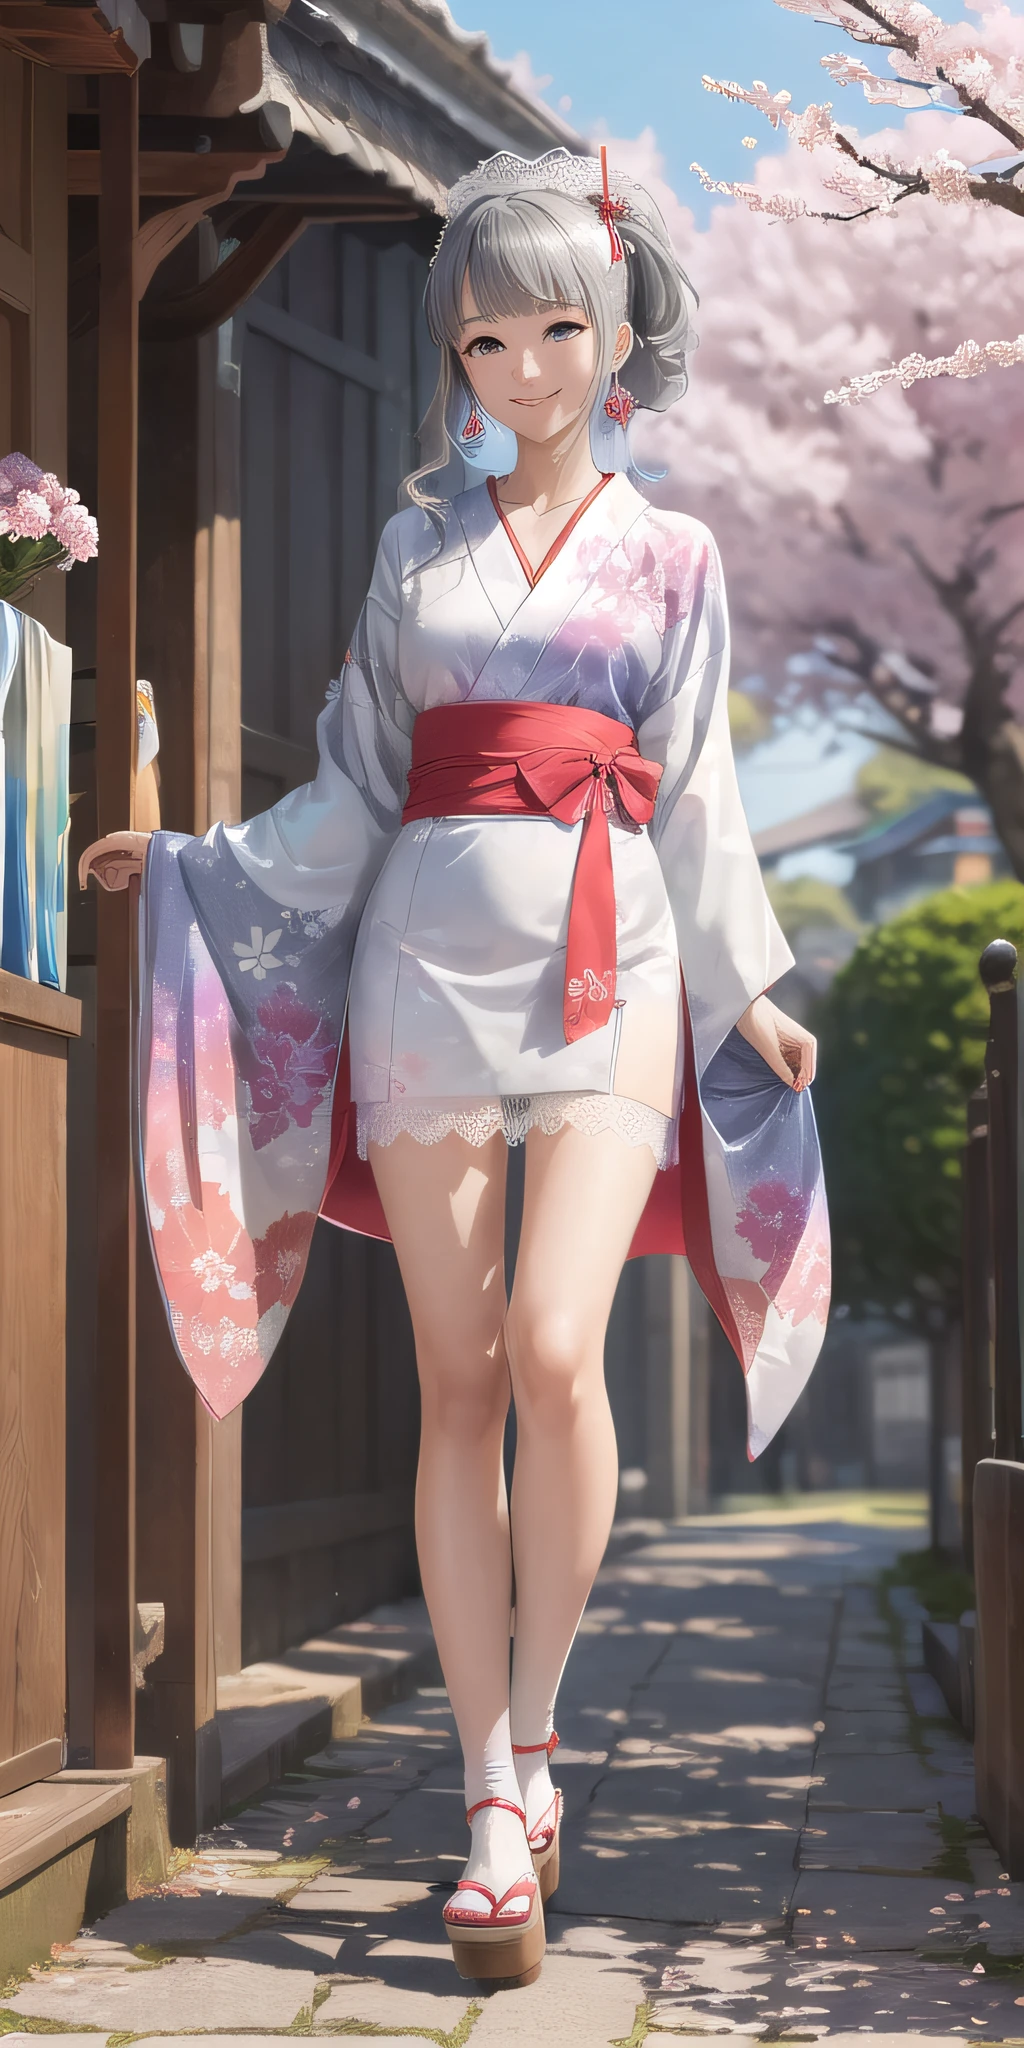 (((Maiden, Ayaka Kamisato, Close-up, Trailing, White and Red Japanese Kimono, Lace Stockings, Delicate Headdress, Cherry Blossom Falling,, Facing Me, Smiling, Standing, Tie-dye Craft, Wearing Clogs, 5 Toes, Long Legs, Shrine Street, Gaseous Sky, HD))), (((Super Detailed, Extreme Detail))), Super Fine Painting, Master Making, Full Body Shot, Highest Quality, 8K, Light Rainbow Glossy Hair, High Ponytail, High Ponytail, Gray Hair, Perfect Eye Makeup, Smile, Collarbone, (Early Morning Light, Warm sun, Tyndall effect)